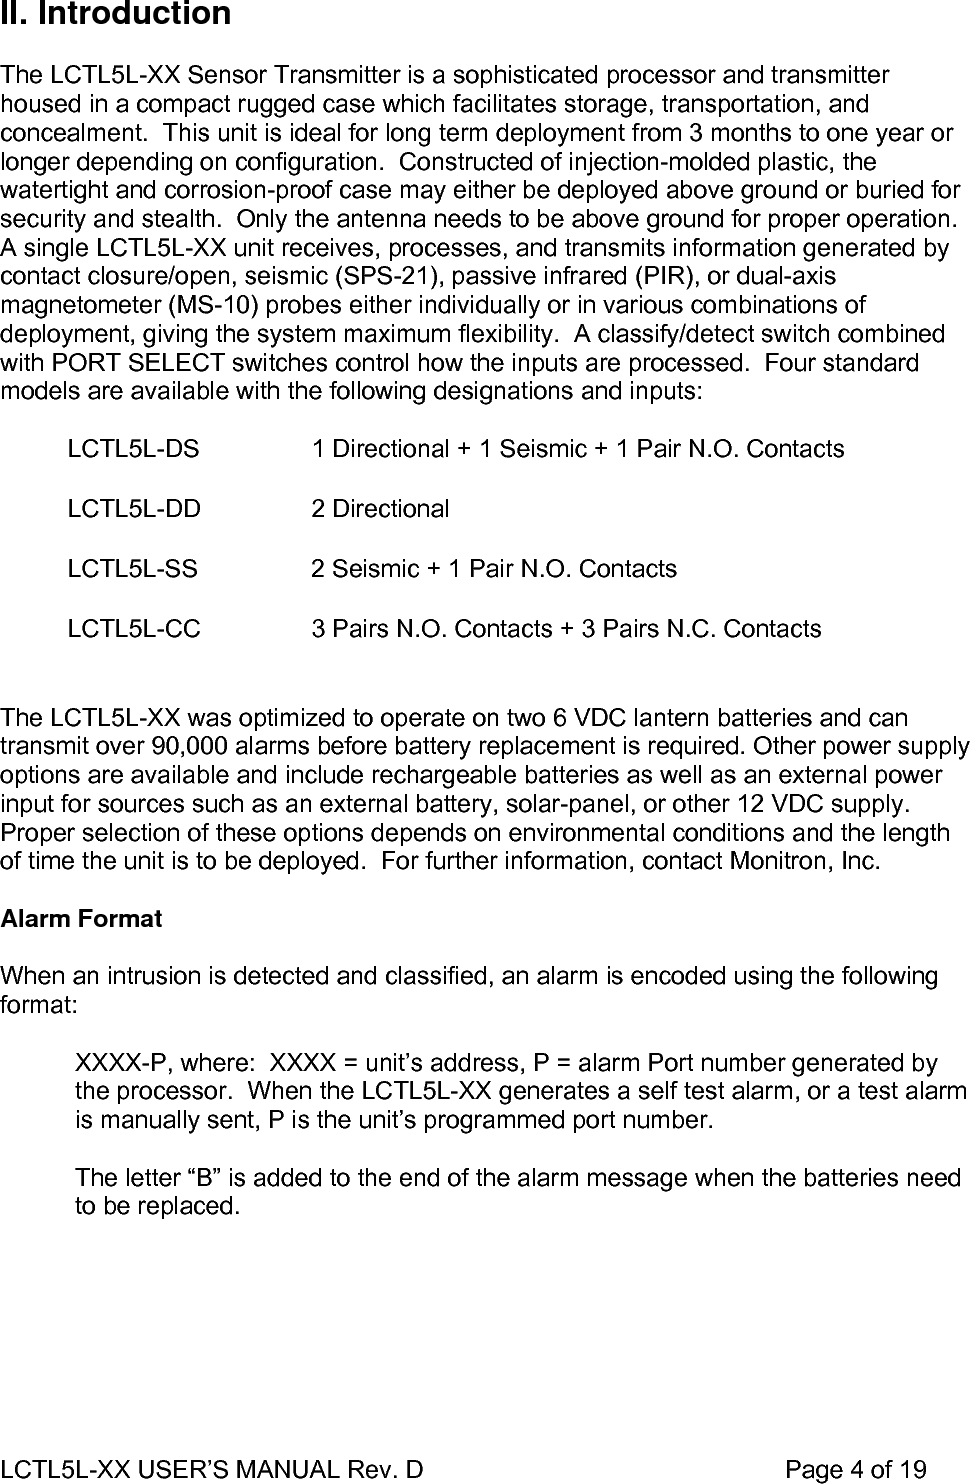 LCTL5L-XX USER’S MANUAL Rev. D                                                    Page 4 of 19  II. Introduction  The LCTL5L-XX Sensor Transmitter is a sophisticated processor and transmitter housed in a compact rugged case which facilitates storage, transportation, and concealment.  This unit is ideal for long term deployment from 3 months to one year or longer depending on configuration.  Constructed of injection-molded plastic, the watertight and corrosion-proof case may either be deployed above ground or buried for security and stealth.  Only the antenna needs to be above ground for proper operation. A single LCTL5L-XX unit receives, processes, and transmits information generated by contact closure/open, seismic (SPS-21), passive infrared (PIR), or dual-axis magnetometer (MS-10) probes either individually or in various combinations of deployment, giving the system maximum flexibility.  A classify/detect switch combined with PORT SELECT switches control how the inputs are processed.  Four standard models are available with the following designations and inputs:   LCTL5L-DS  1 Directional + 1 Seismic + 1 Pair N.O. Contacts LCTL5L-DD 2 Directional LCTL5L-SS  2 Seismic + 1 Pair N.O. Contacts LCTL5L-CC  3 Pairs N.O. Contacts + 3 Pairs N.C. Contacts  The LCTL5L-XX was optimized to operate on two 6 VDC lantern batteries and can transmit over 90,000 alarms before battery replacement is required. Other power supply options are available and include rechargeable batteries as well as an external power input for sources such as an external battery, solar-panel, or other 12 VDC supply.  Proper selection of these options depends on environmental conditions and the length of time the unit is to be deployed.  For further information, contact Monitron, Inc.  Alarm Format   When an intrusion is detected and classified, an alarm is encoded using the following format:  XXXX-P, where:  XXXX = unit’s address, P = alarm Port number generated by the processor.  When the LCTL5L-XX generates a self test alarm, or a test alarm is manually sent, P is the unit’s programmed port number.  The letter “B” is added to the end of the alarm message when the batteries need to be replaced.   